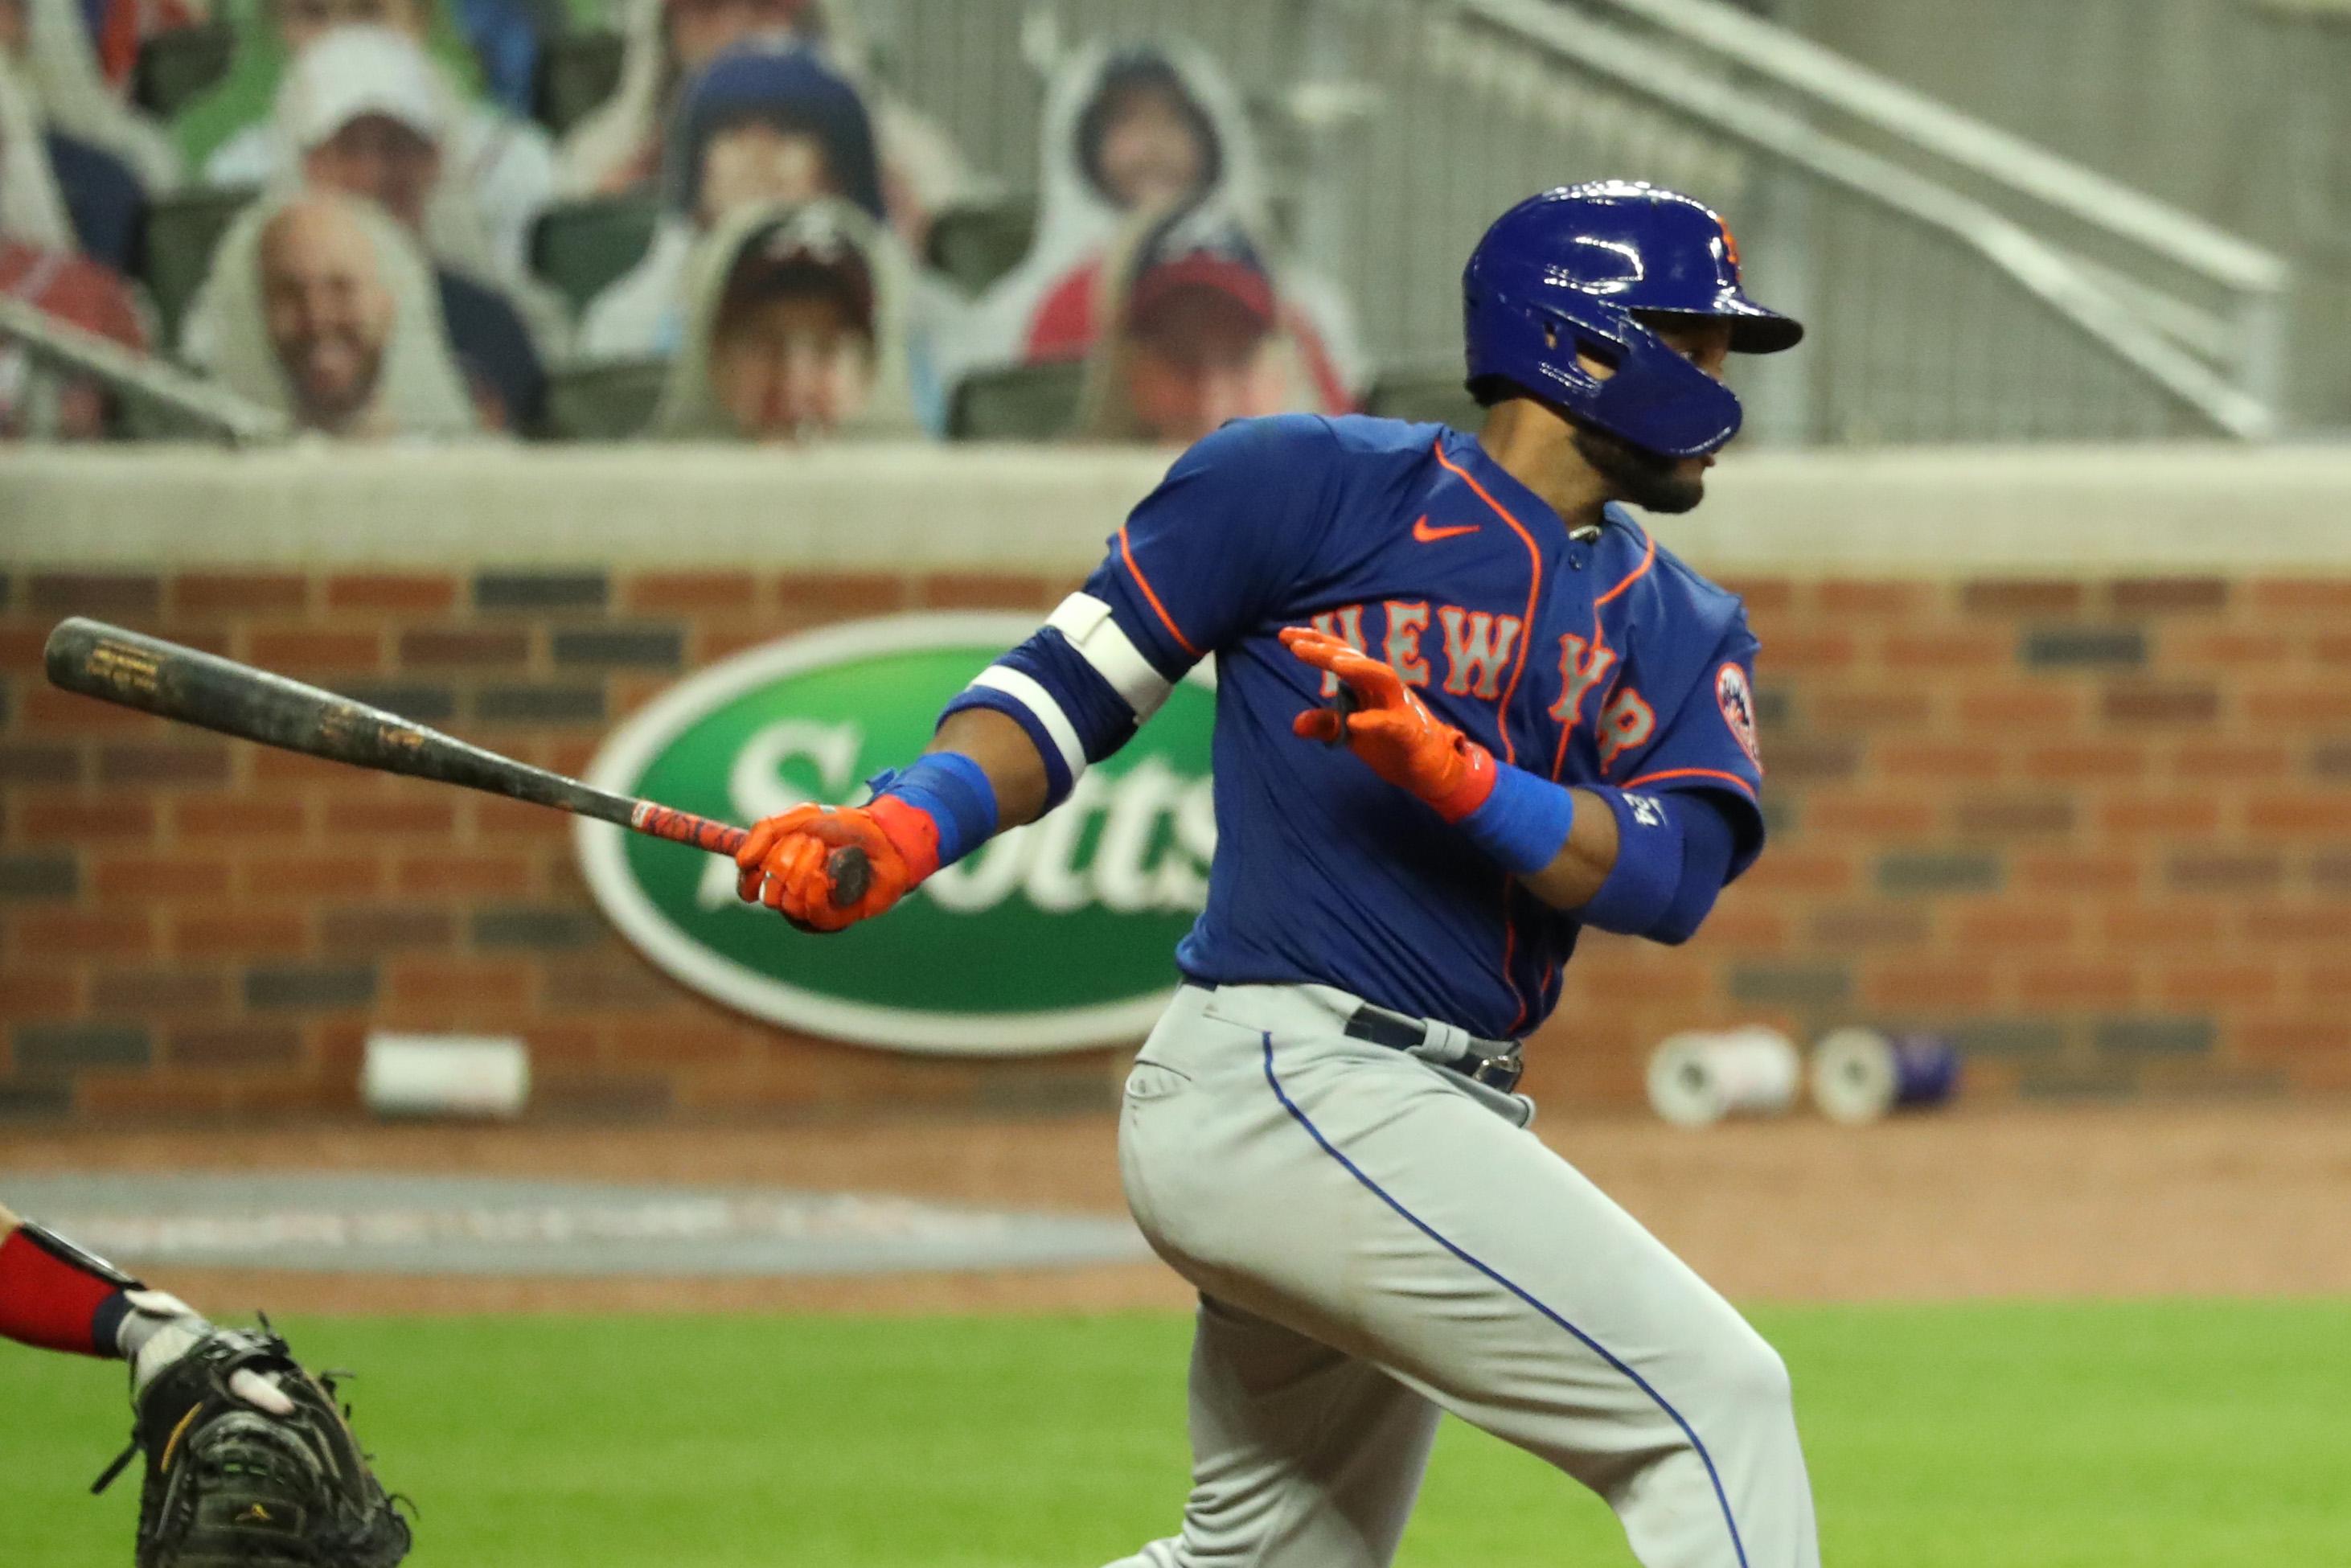 New York Mets second baseman Robinson Cano (24) hits an RBI single in the fifth inning against the Atlanta Braves at Truist Park. / Jason Getz-USA TODAY Sports